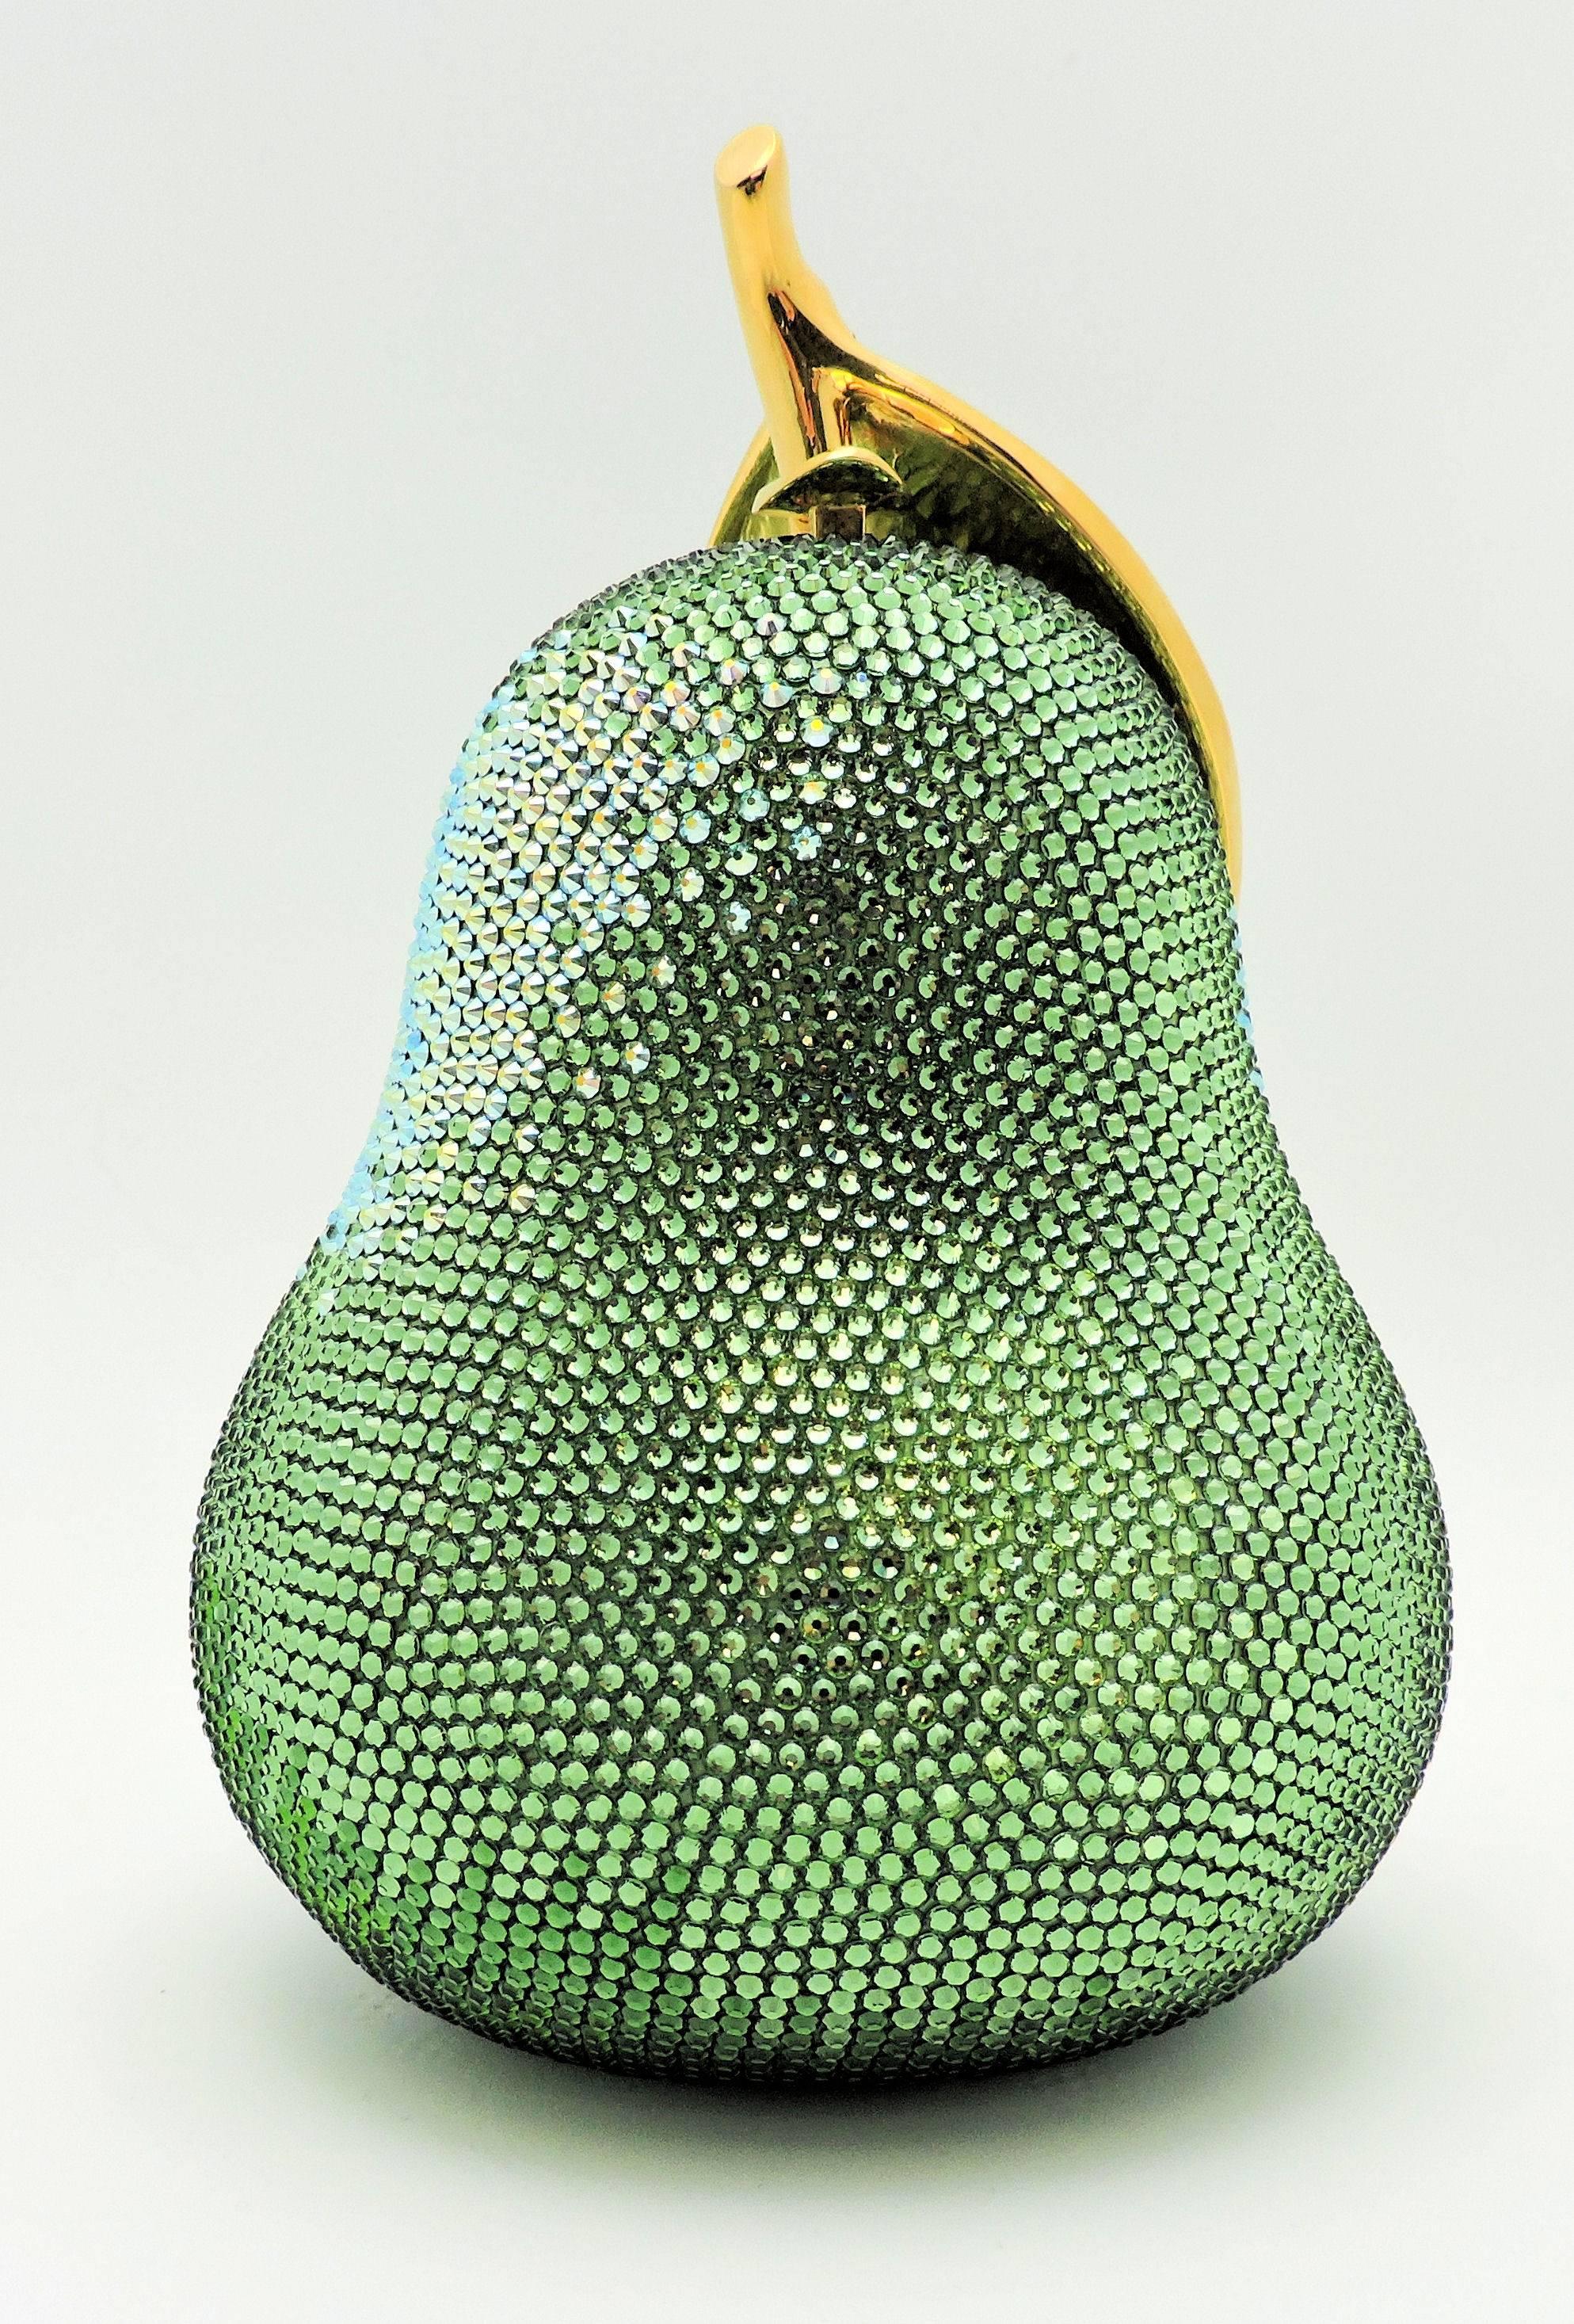 Immaculate condition Forelle Pear jeweled evening bag by Judith Leiber.  As is her style, the bag is not just the pear, but also has a large leaf overlapping.  Accompanied by mirror, coin purse, booklet and mirror pouch.  Hinged chain fitting so